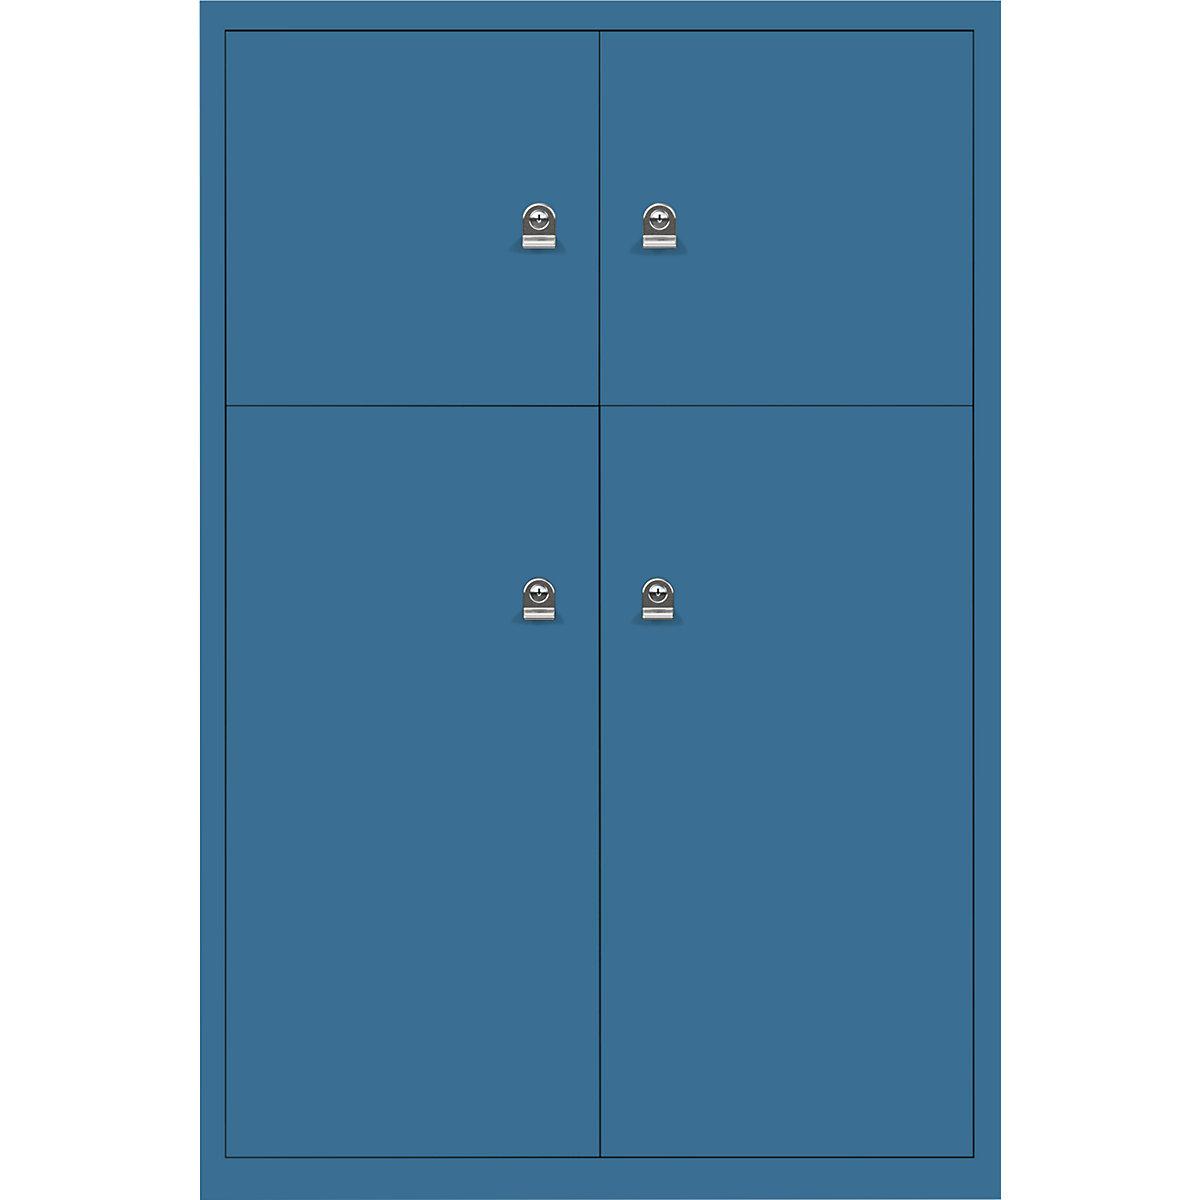 BISLEY – LateralFile™ lodge, with 4 lockable compartments, height 2 x 375 mm, 2 x 755 mm, azure